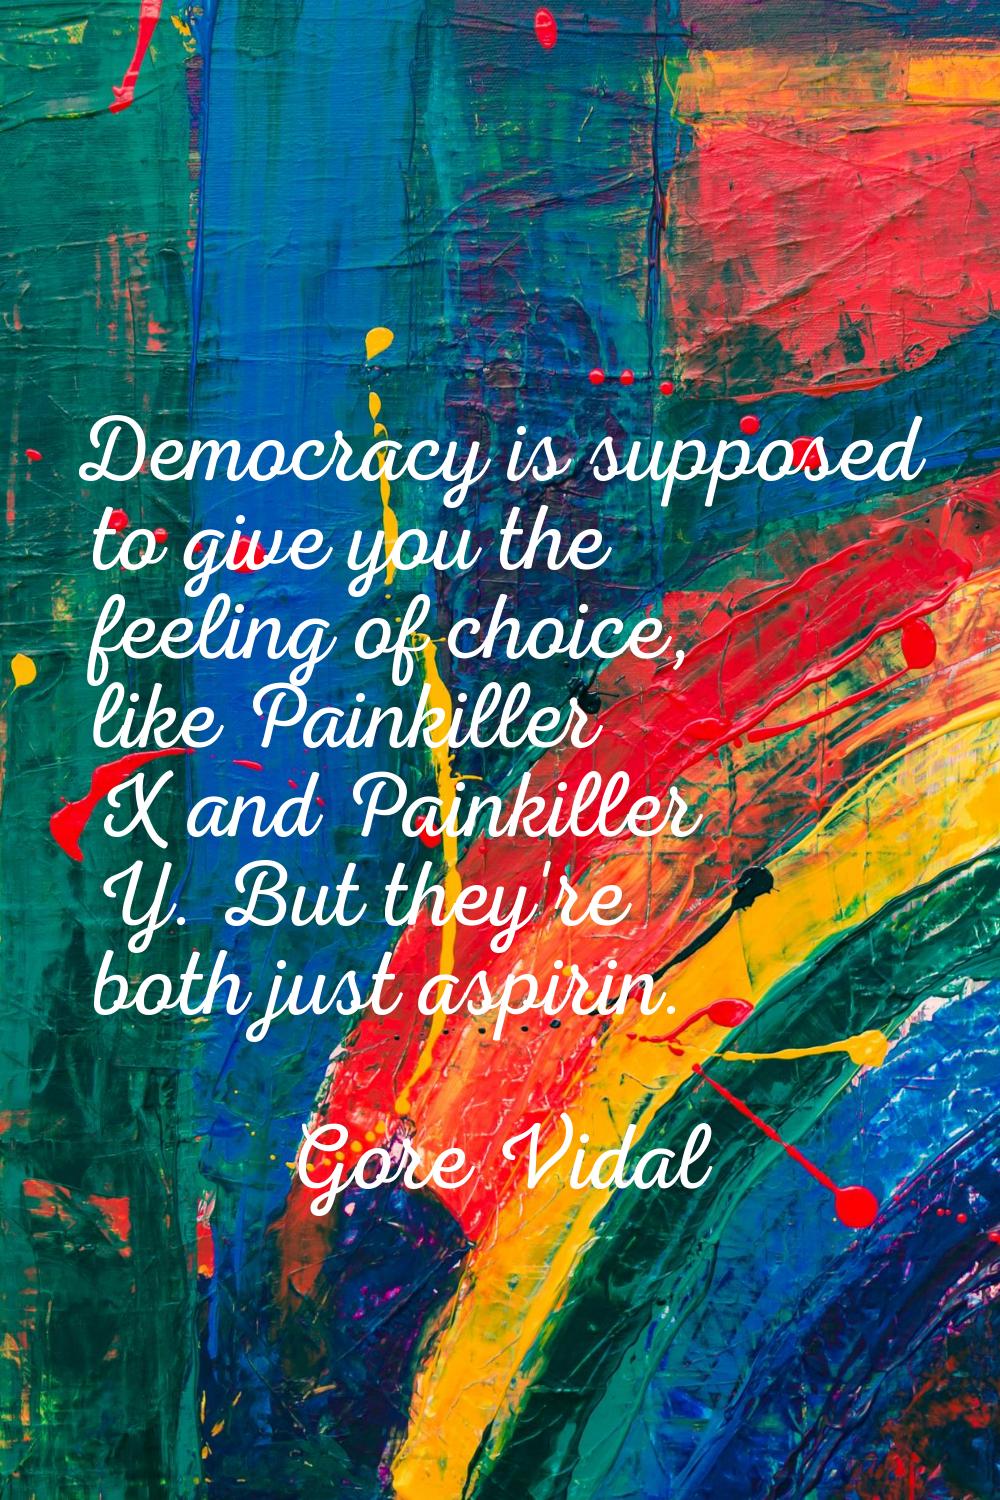 Democracy is supposed to give you the feeling of choice, like Painkiller X and Painkiller Y. But th